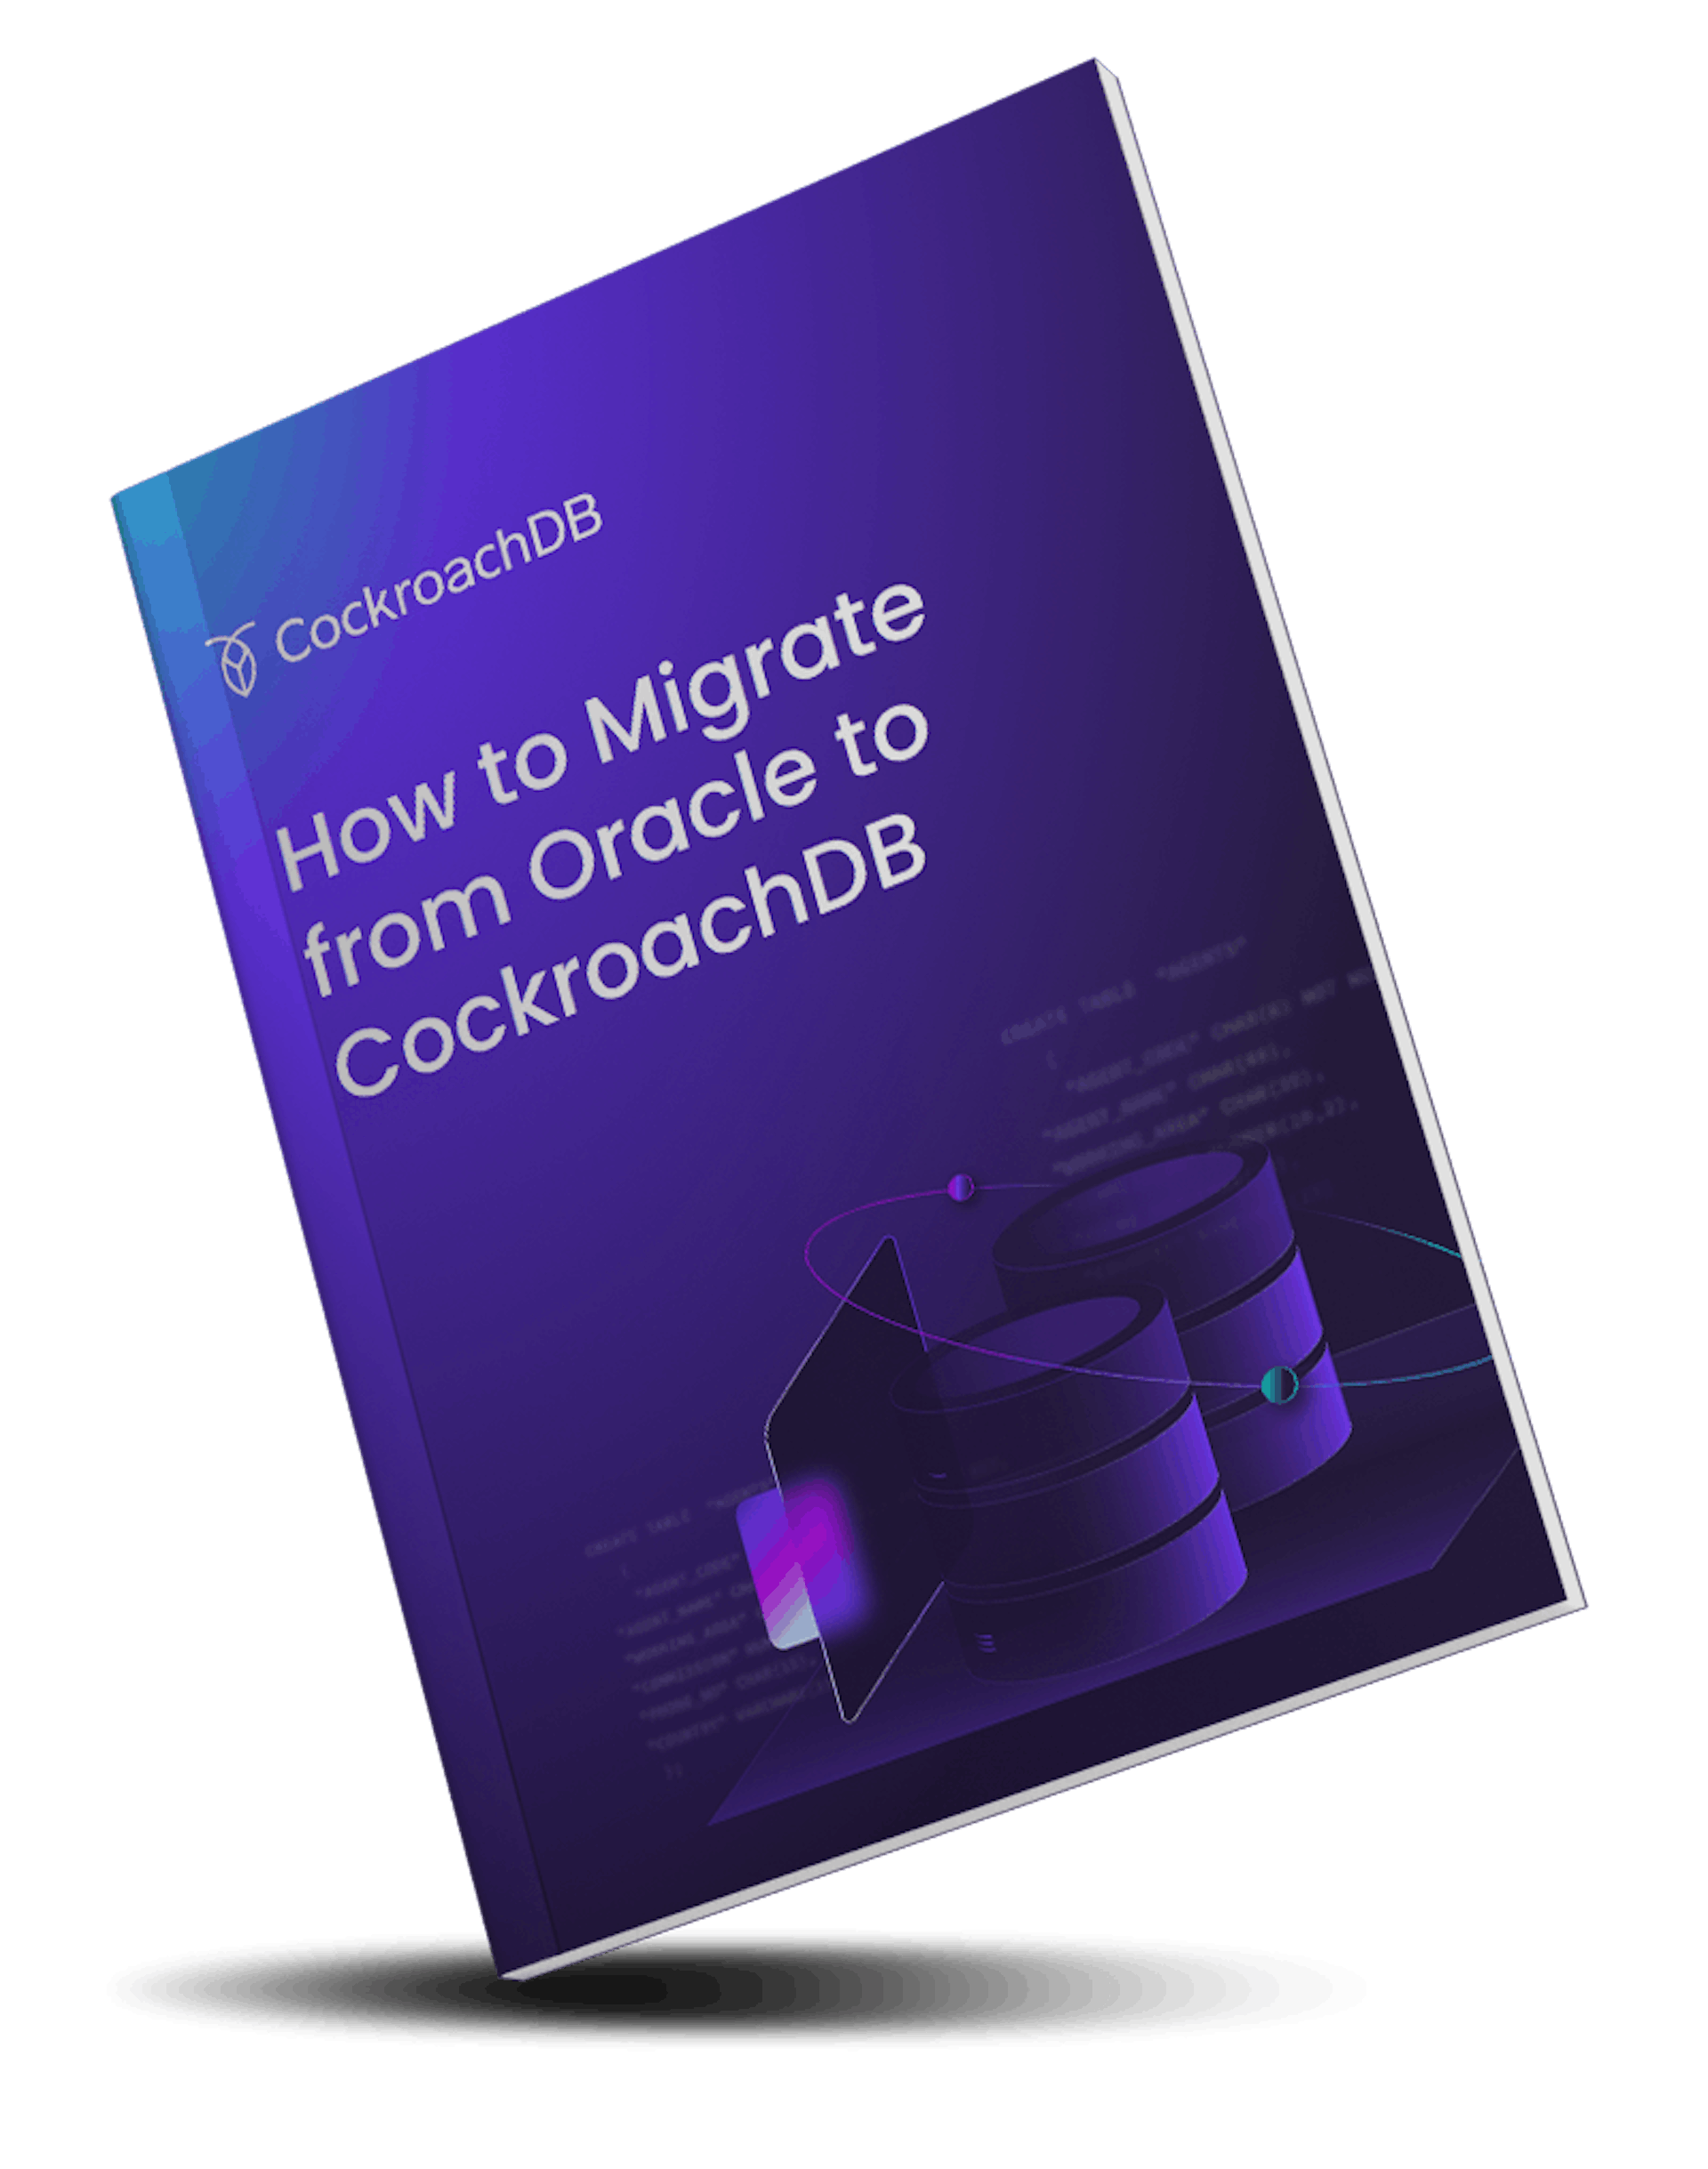 Guide-Cover-Mockup-how to migrate from oracle (1)